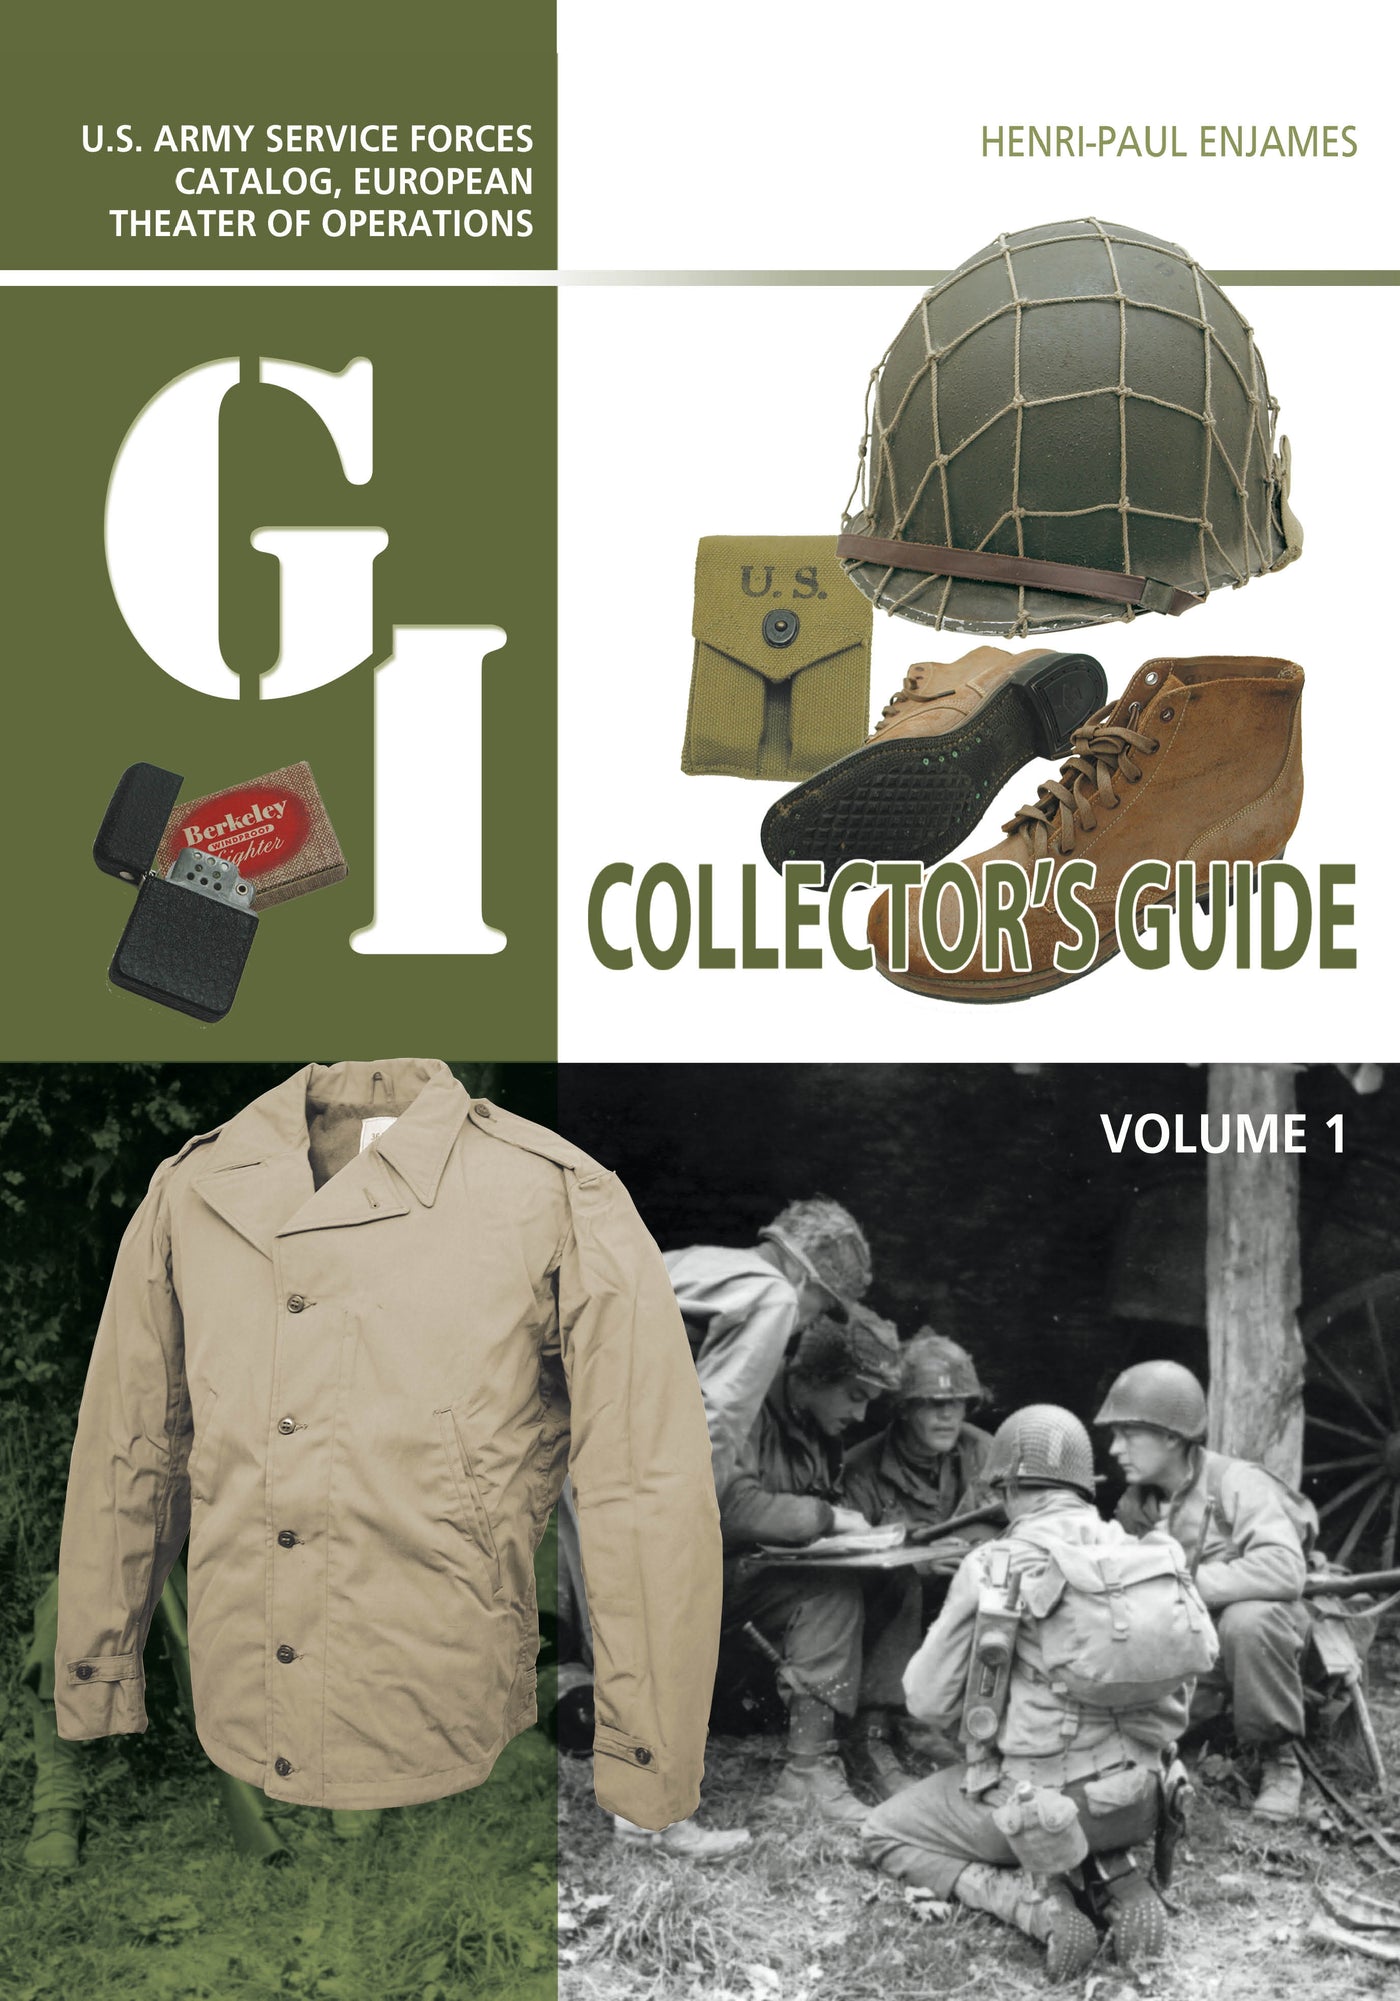 The G.I. Collector's Guide: U.S. Army Service Forces Catalog, European Theater of Operations VOLUME 1